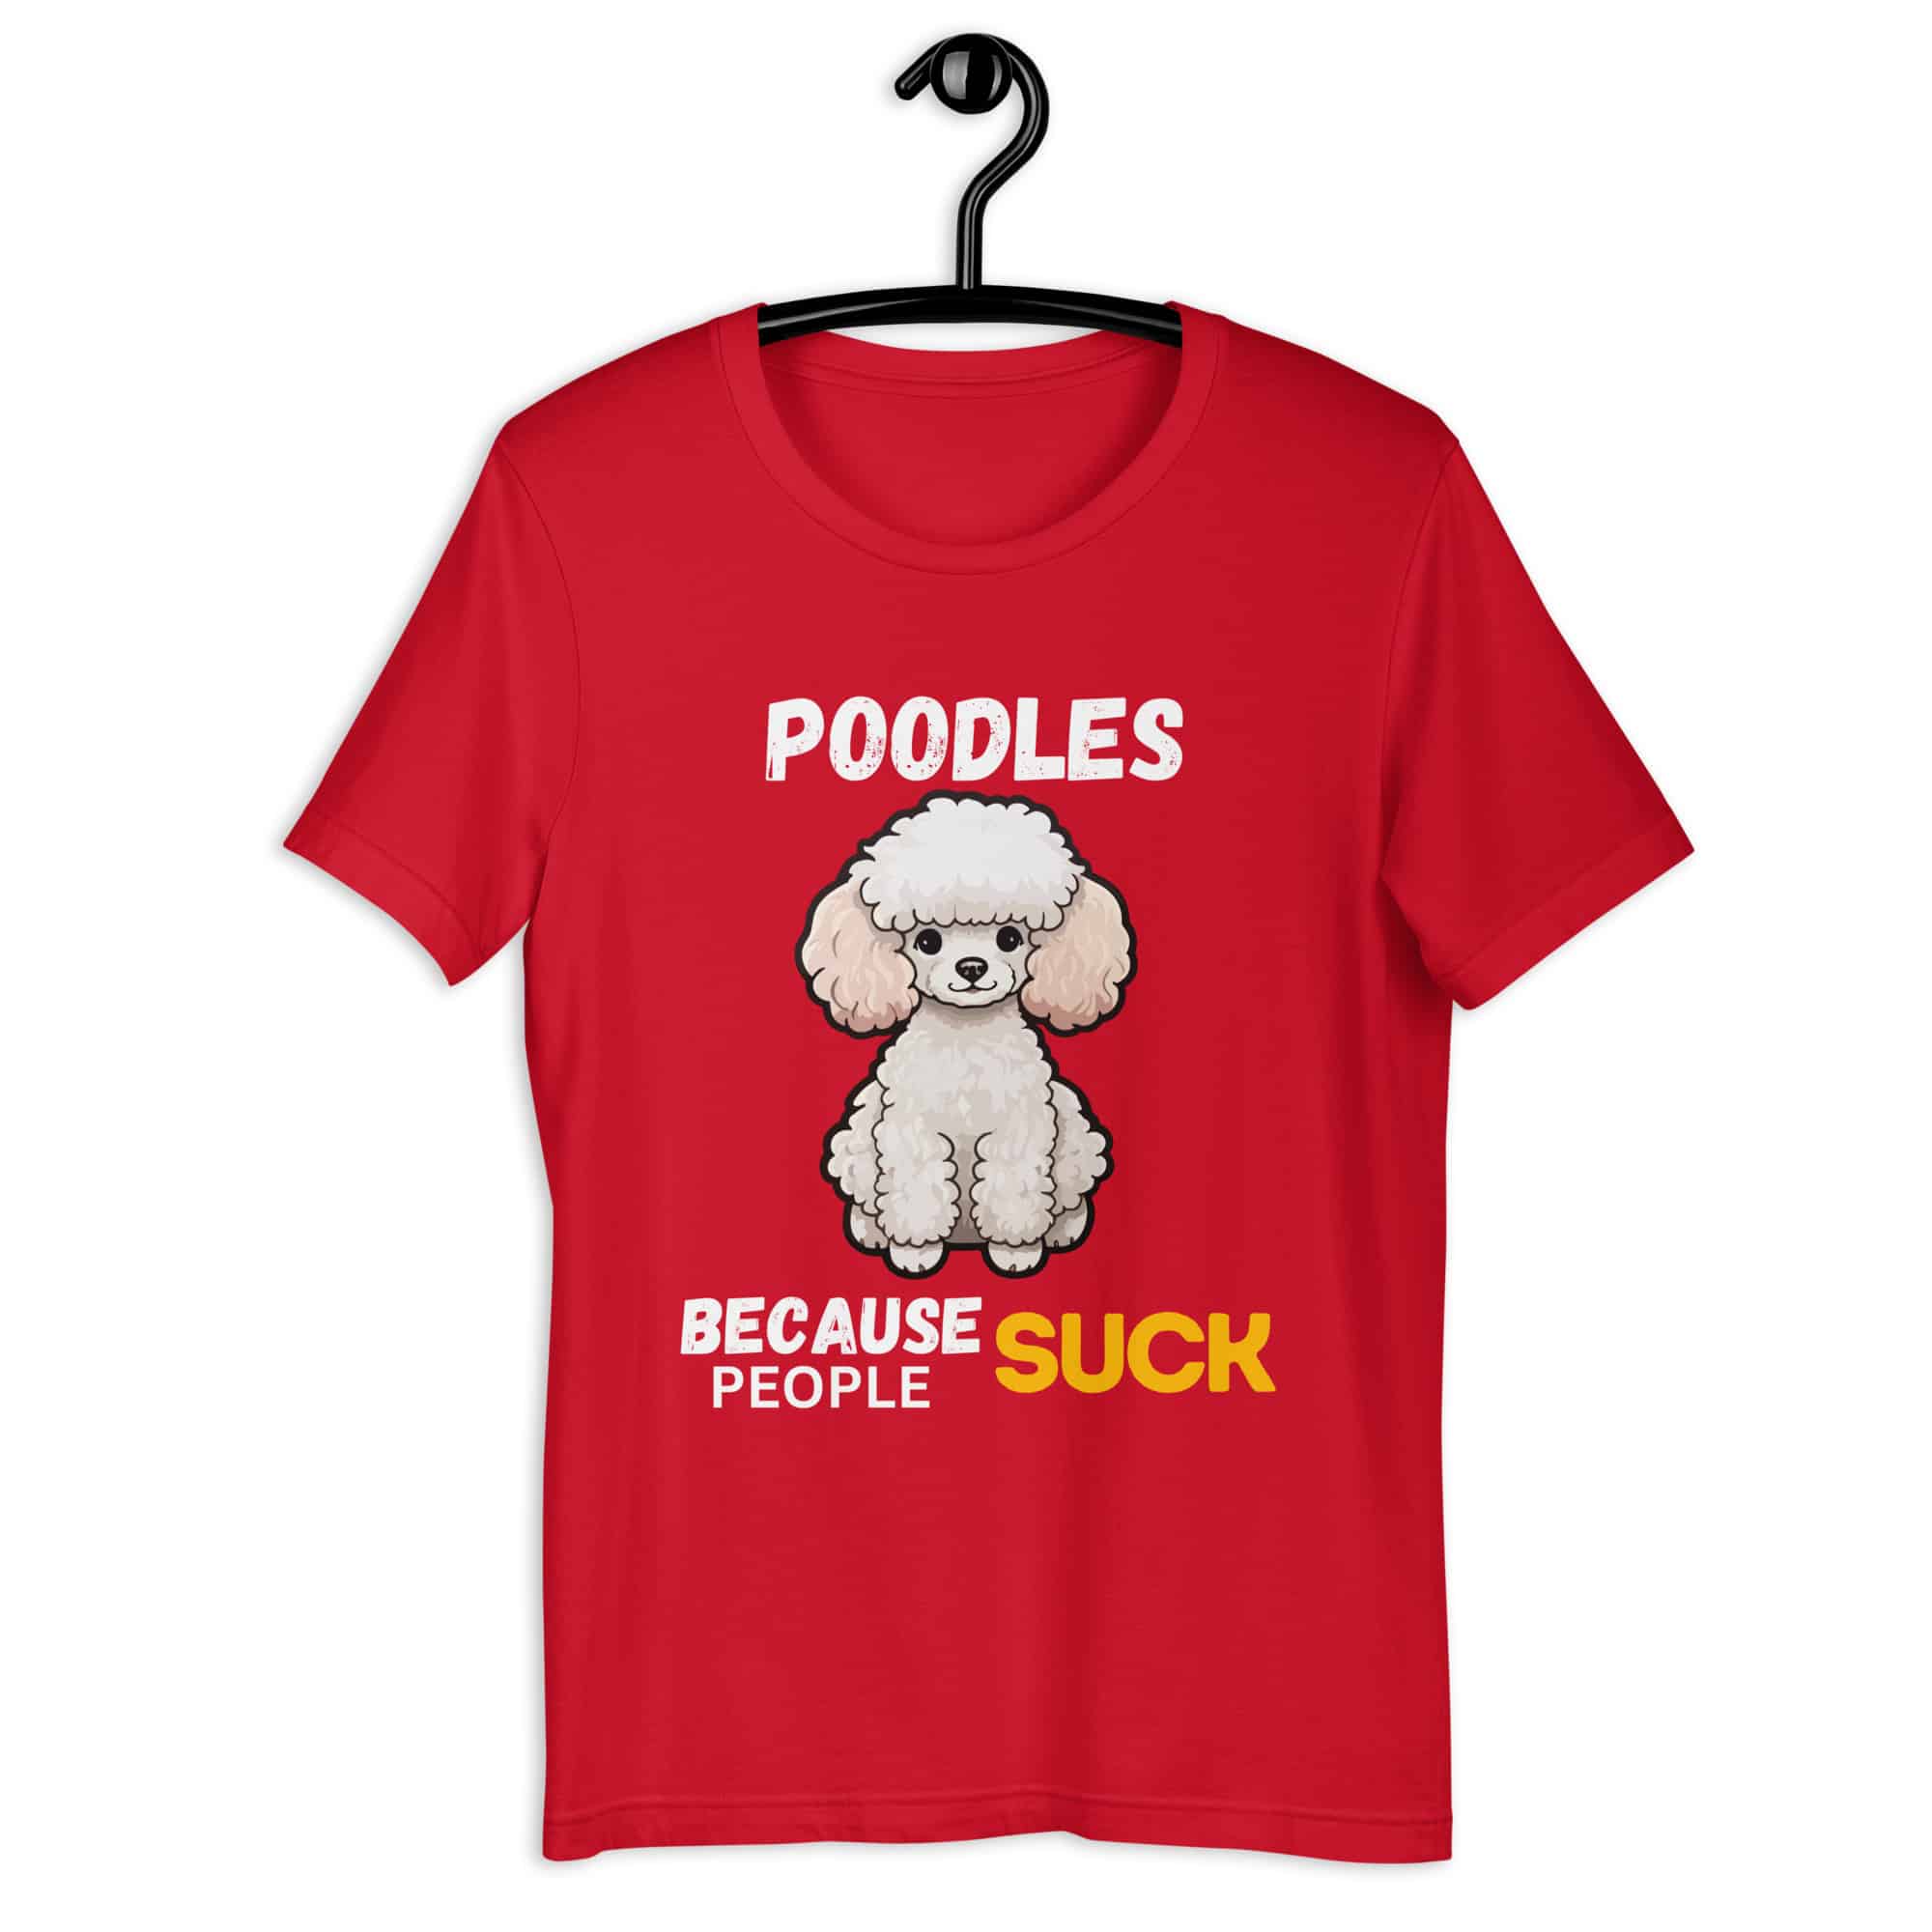 Poodles Because People Suck Unisex T-Shirt red